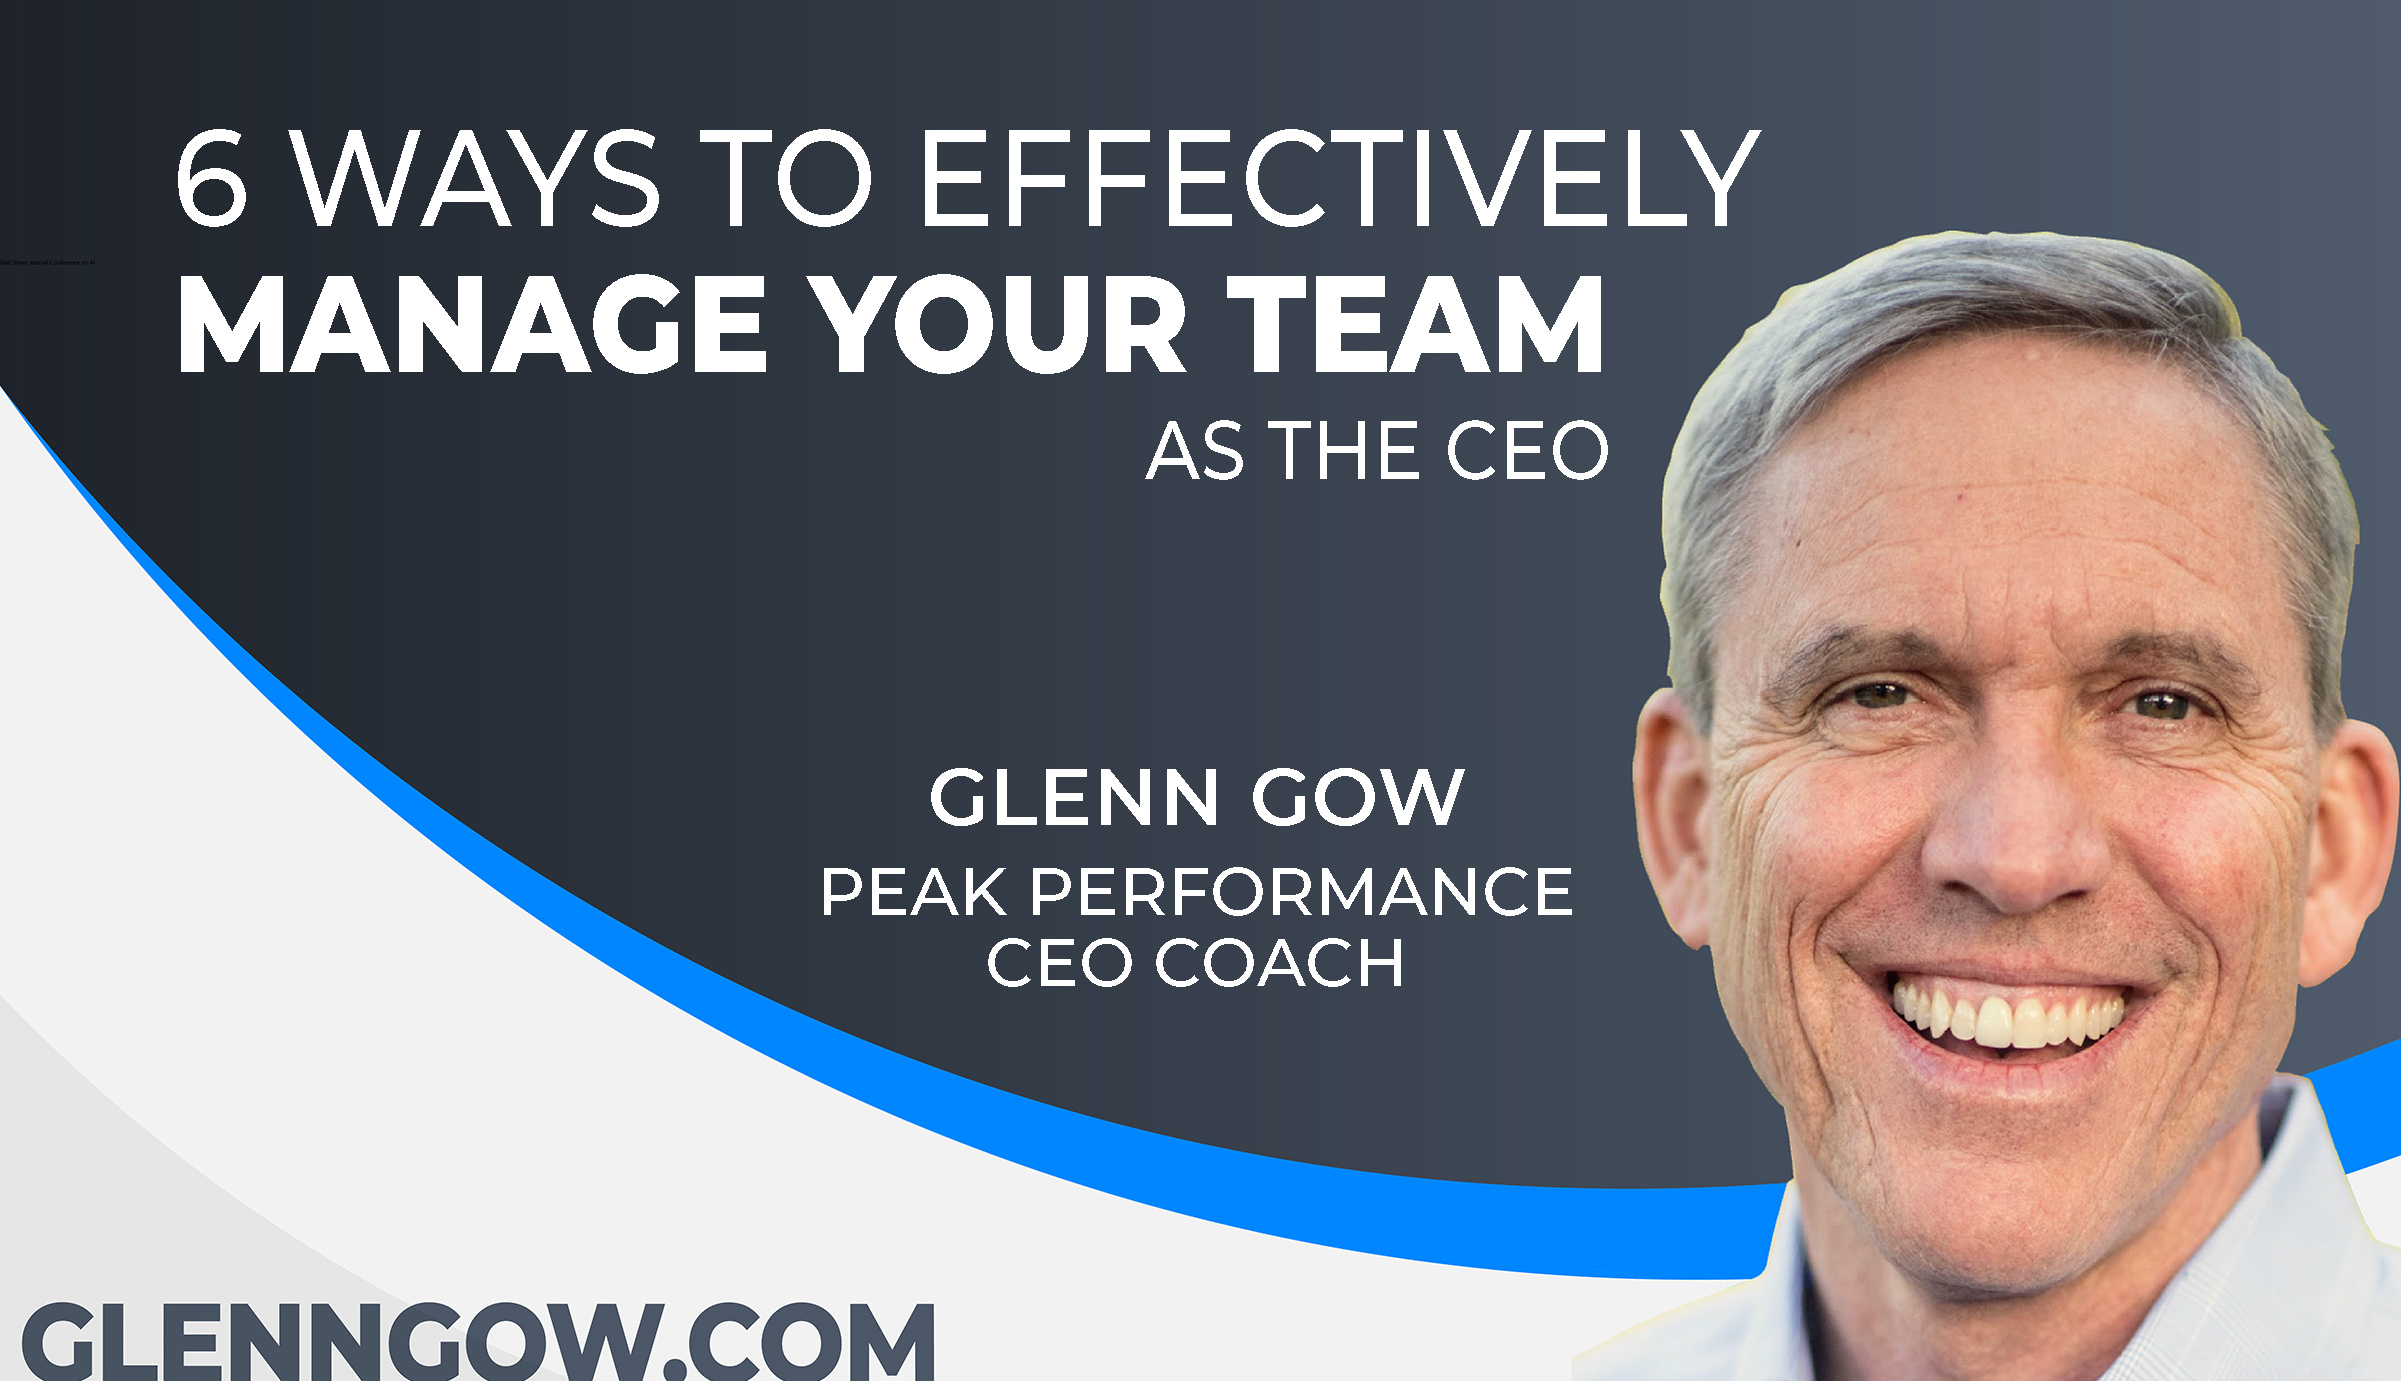 6 Ways to Effectively Manage Your Team as the CEO